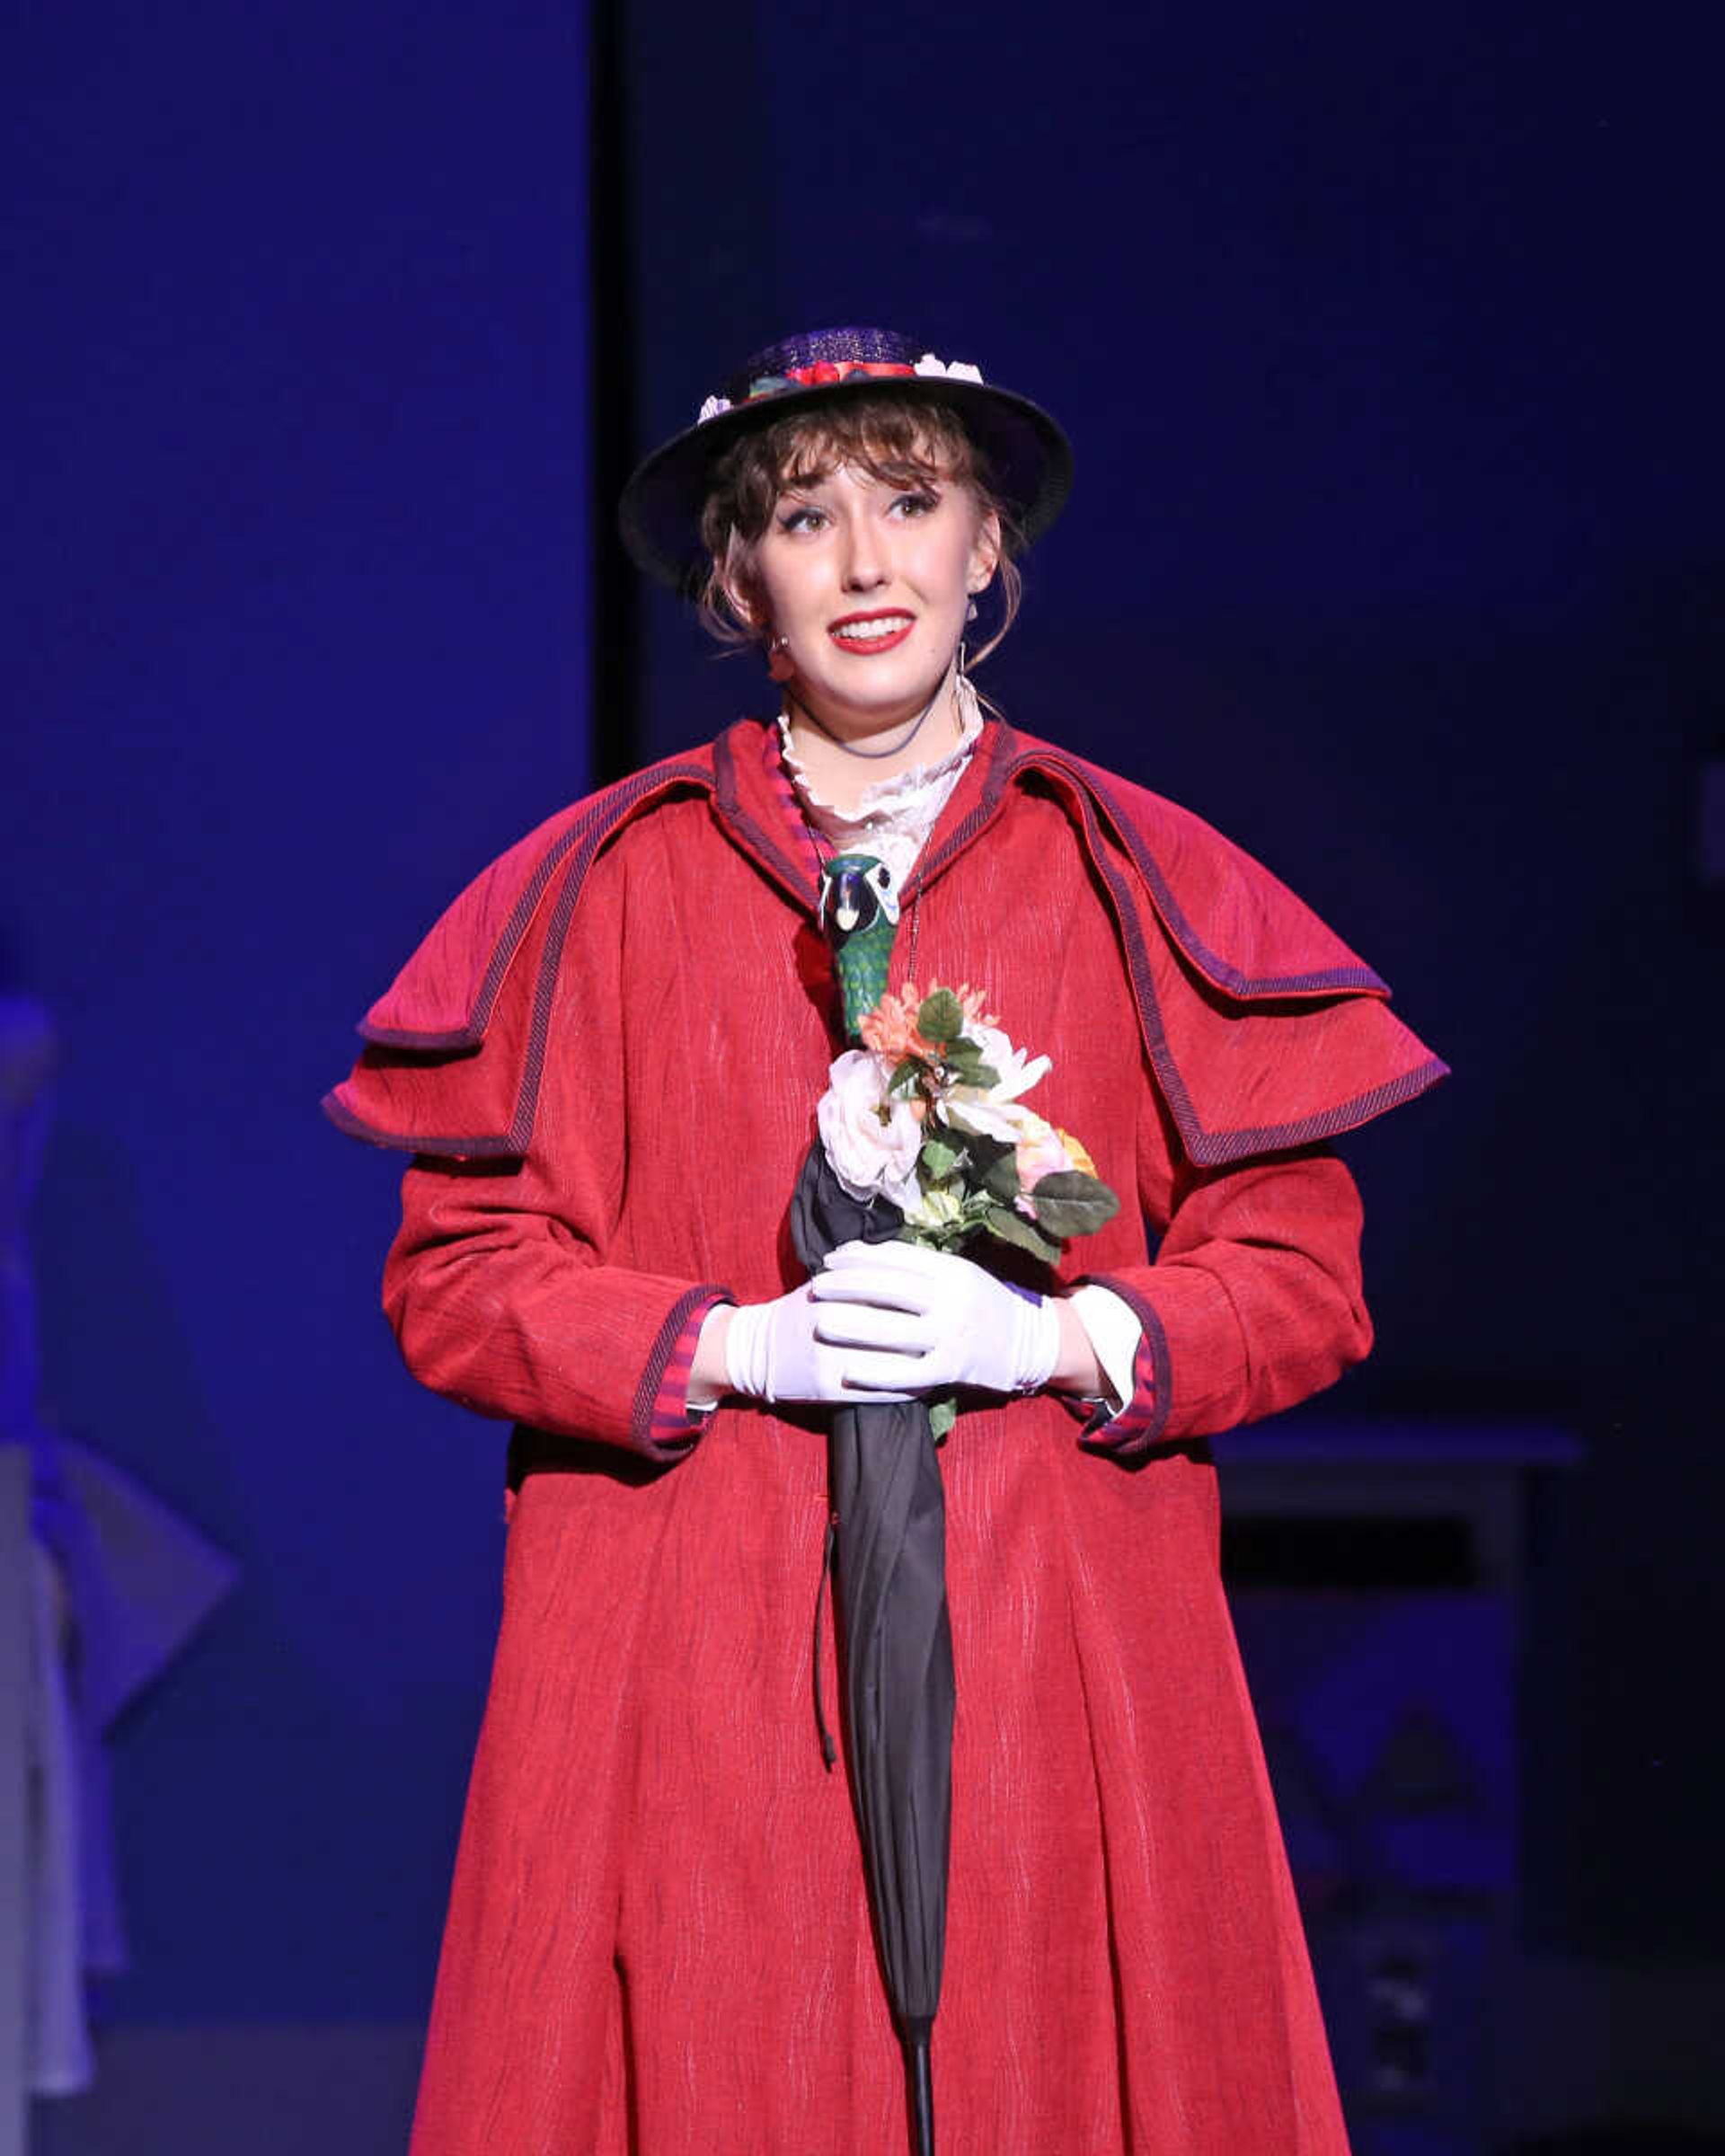  Abigail Alsmeyer as Mary Poppins in “Mary Poppins” produced by the Conservatory of Theatre and Dance at Southeast.
